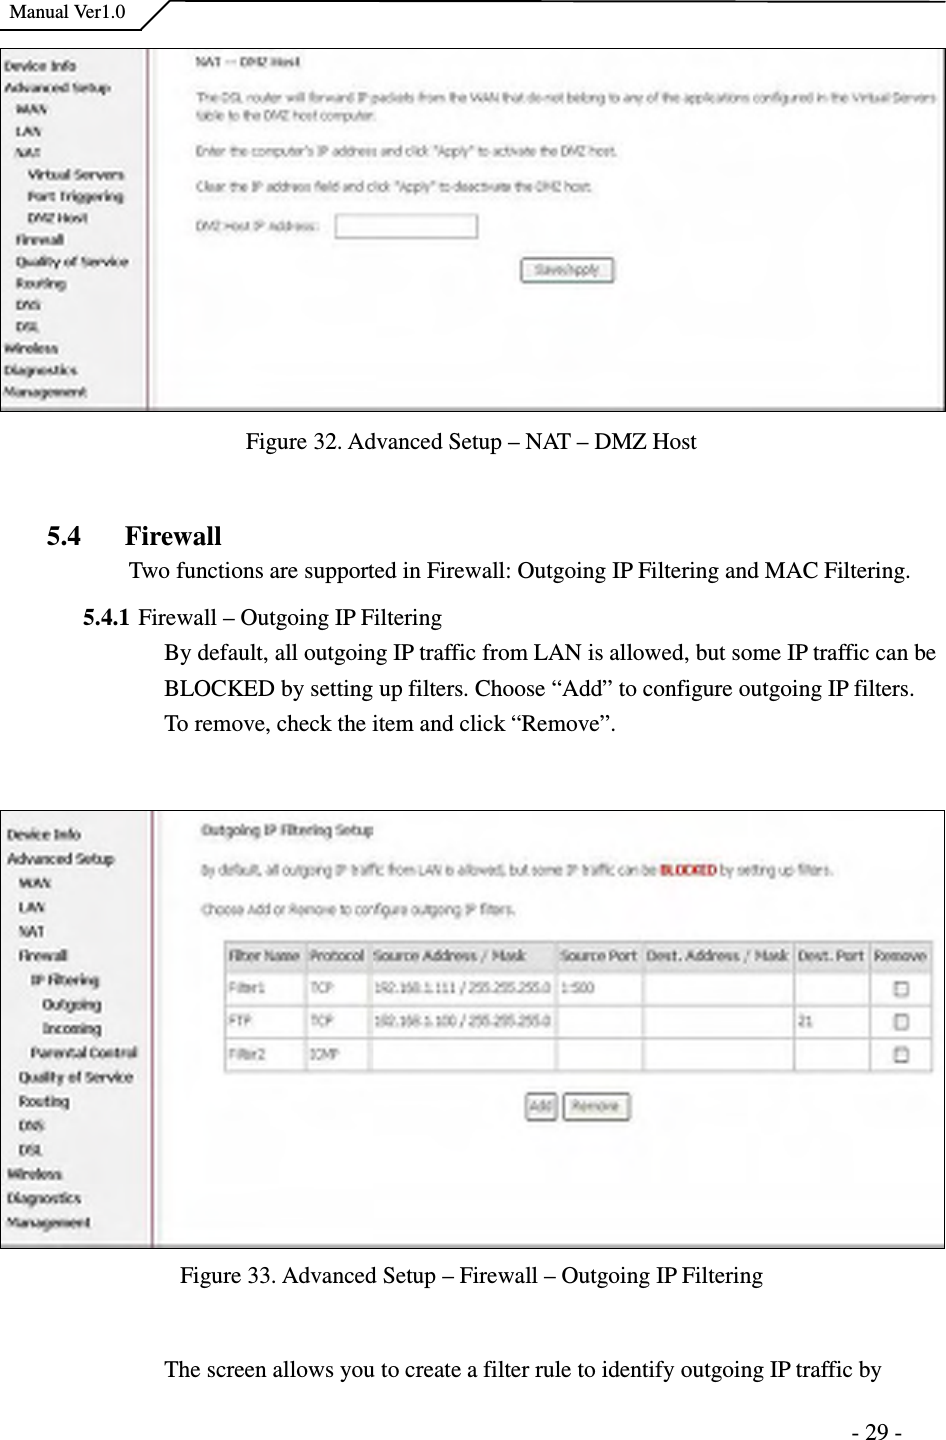    Manual Ver1.0                                                                      - 29 - Figure 32. Advanced Setup – NAT – DMZ Host  5.4 Firewall Two functions are supported in Firewall: Outgoing IP Filtering and MAC Filtering. 5.4.1 Firewall – Outgoing IP Filtering   By default, all outgoing IP traffic from LAN is allowed, but some IP traffic can be BLOCKED by setting up filters. Choose “Add” to configure outgoing IP filters. To remove, check the item and click “Remove”.  Figure 33. Advanced Setup – Firewall – Outgoing IP Filtering  The screen allows you to create a filter rule to identify outgoing IP traffic by 